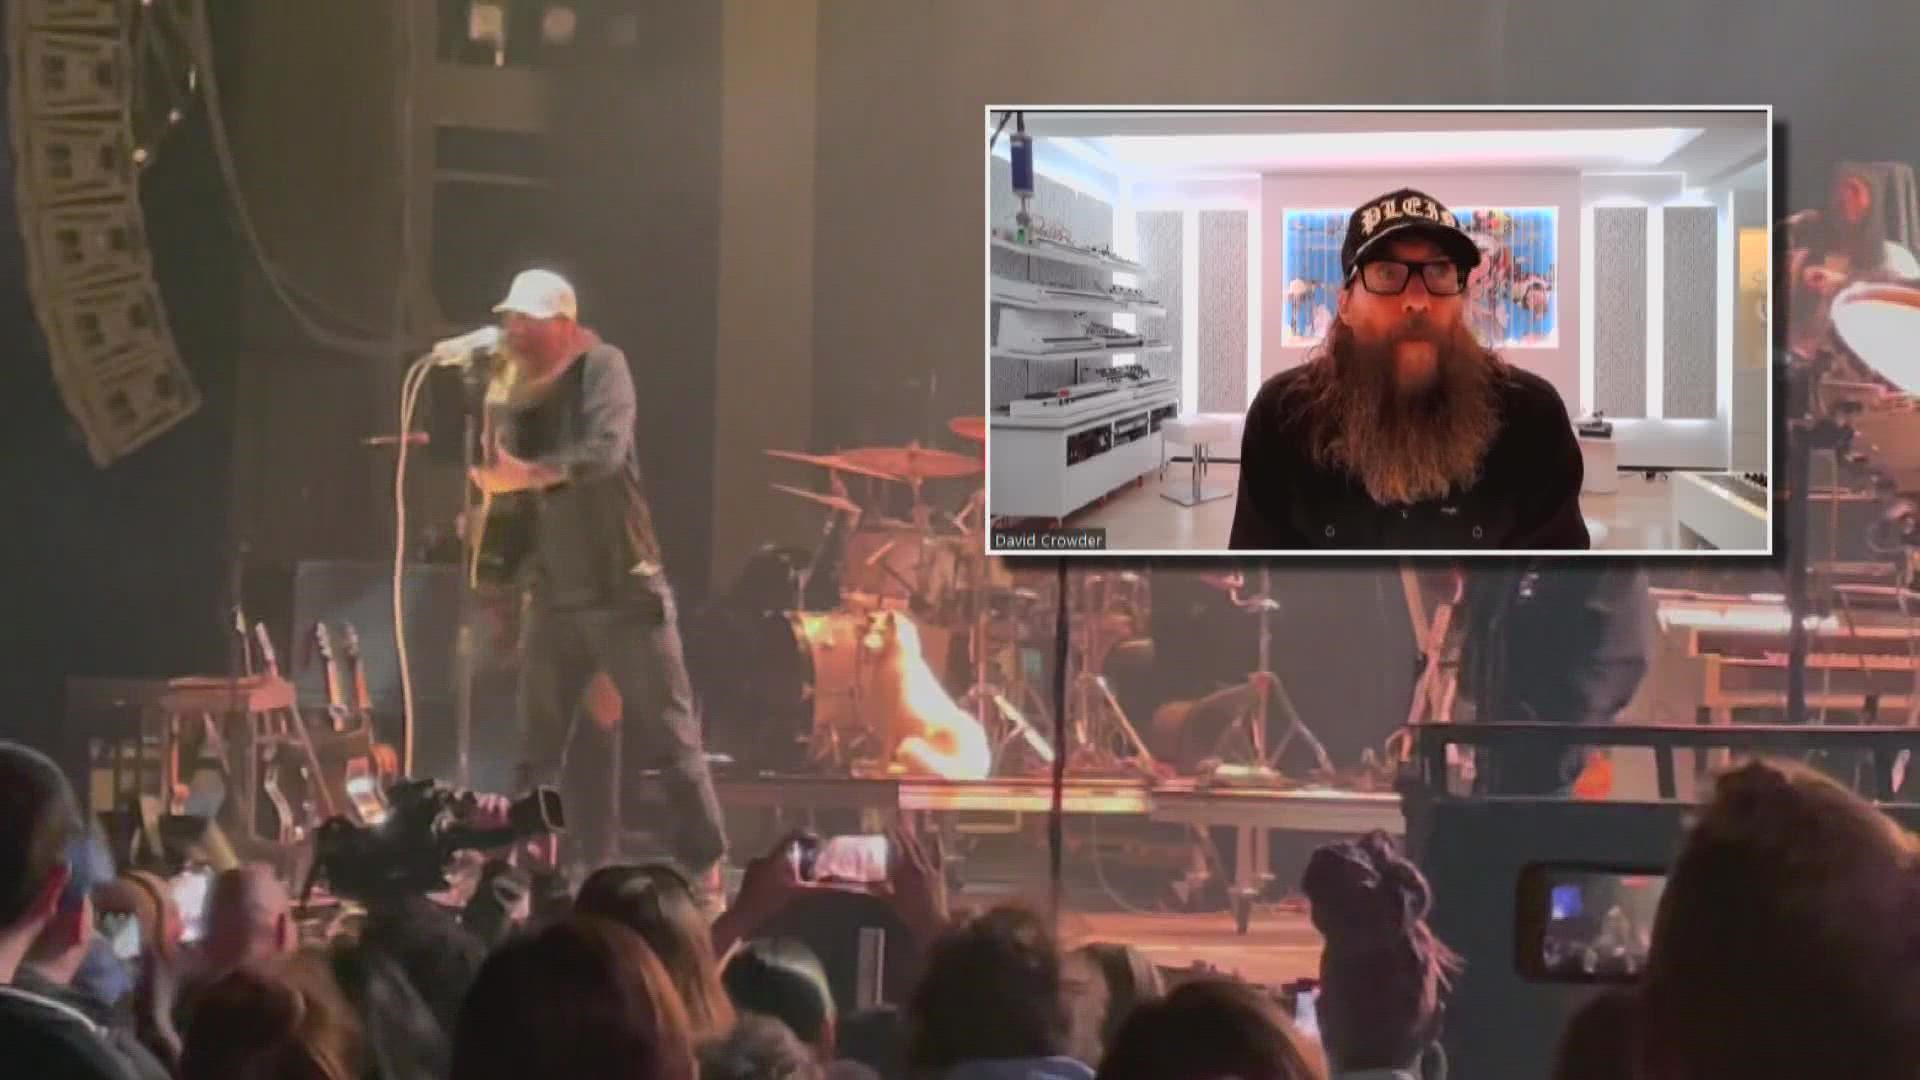 2 Wants to Know talks to Grammy-nominated David Crowder on his upcoming concert at Greensboro Coliseum.